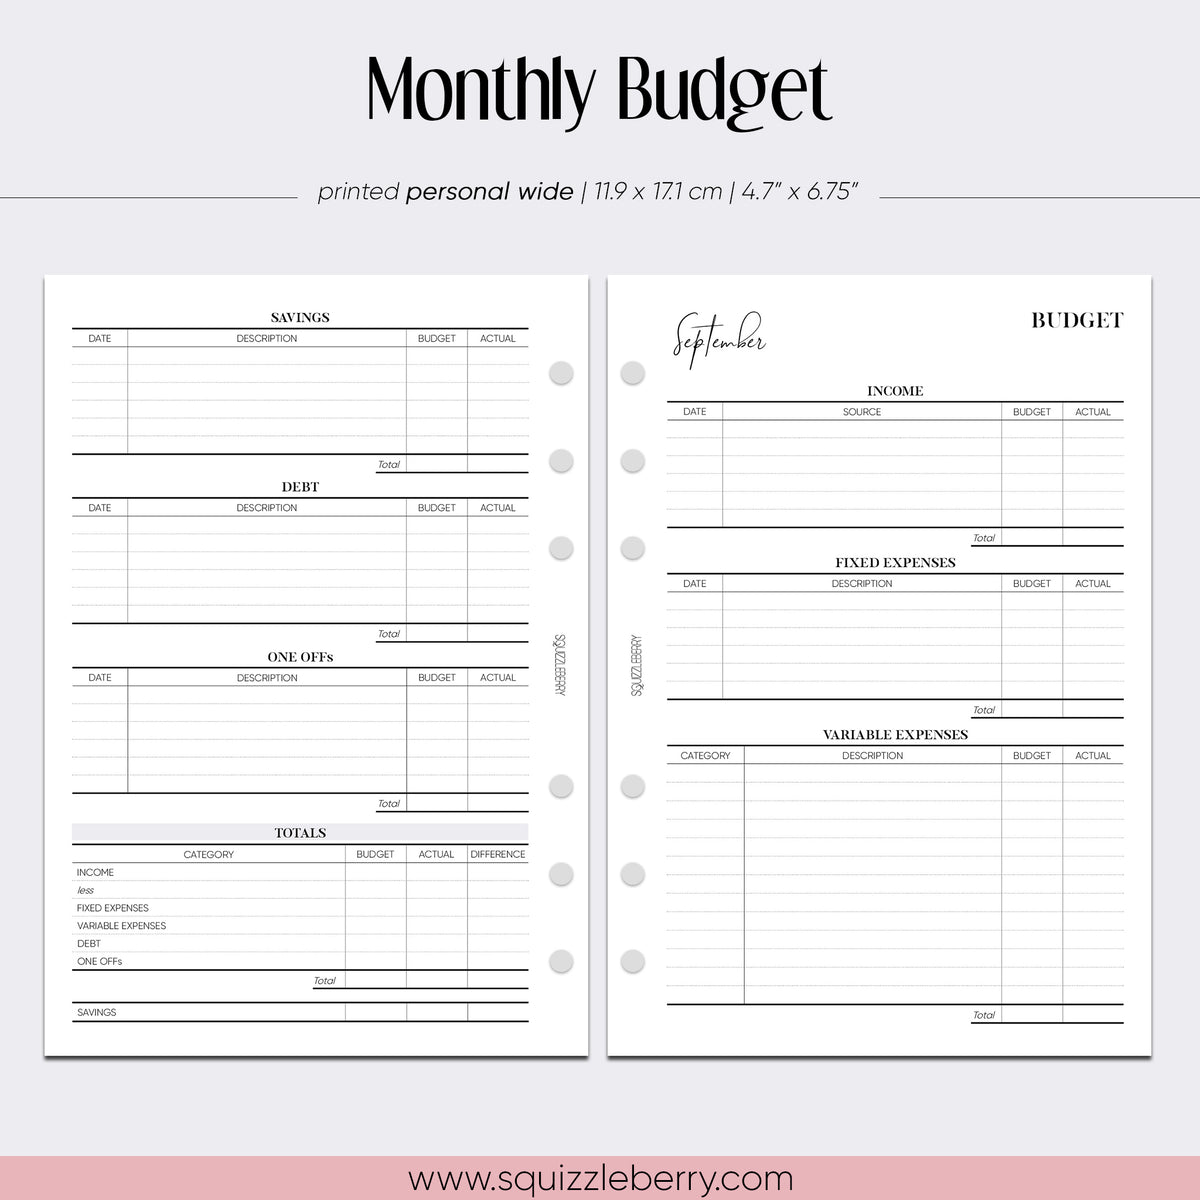 Monthly Budget - Personal Wide | SquizzleBerry